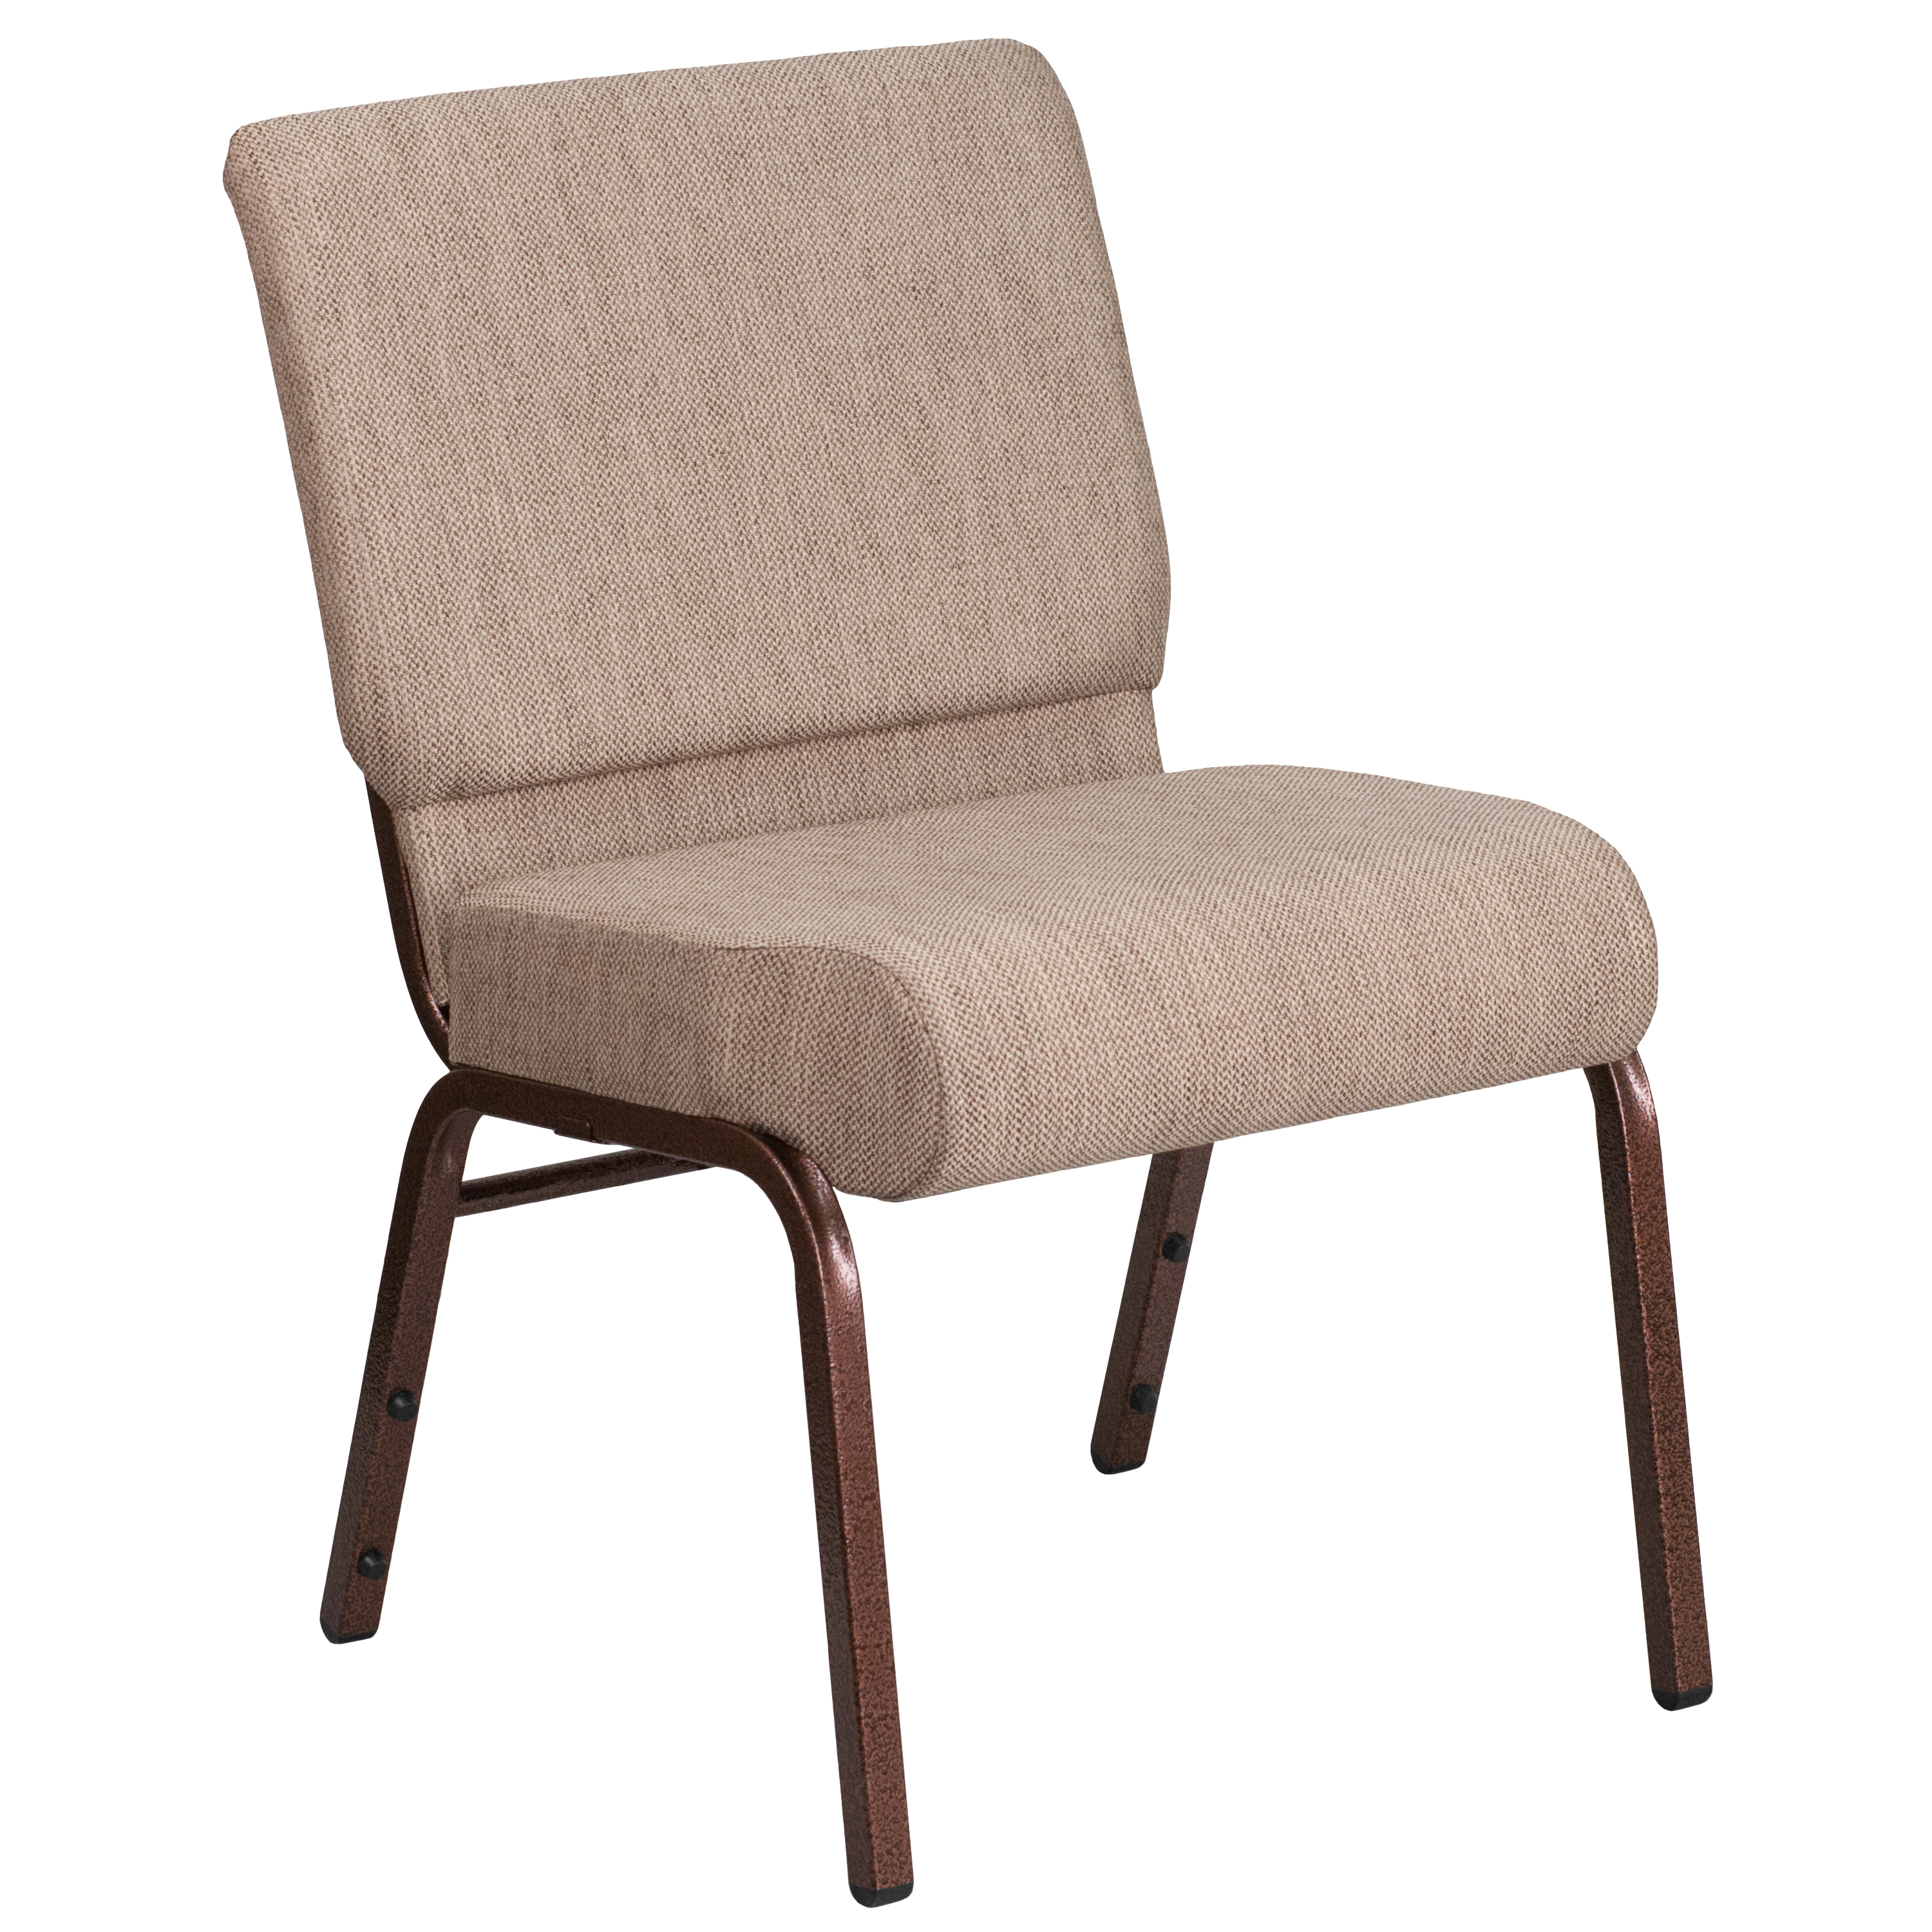 Flash Furniture HERCULES Series 21''W Stacking Church Chair in Beige Fabric - Copper Vein Frame - image 2 of 12